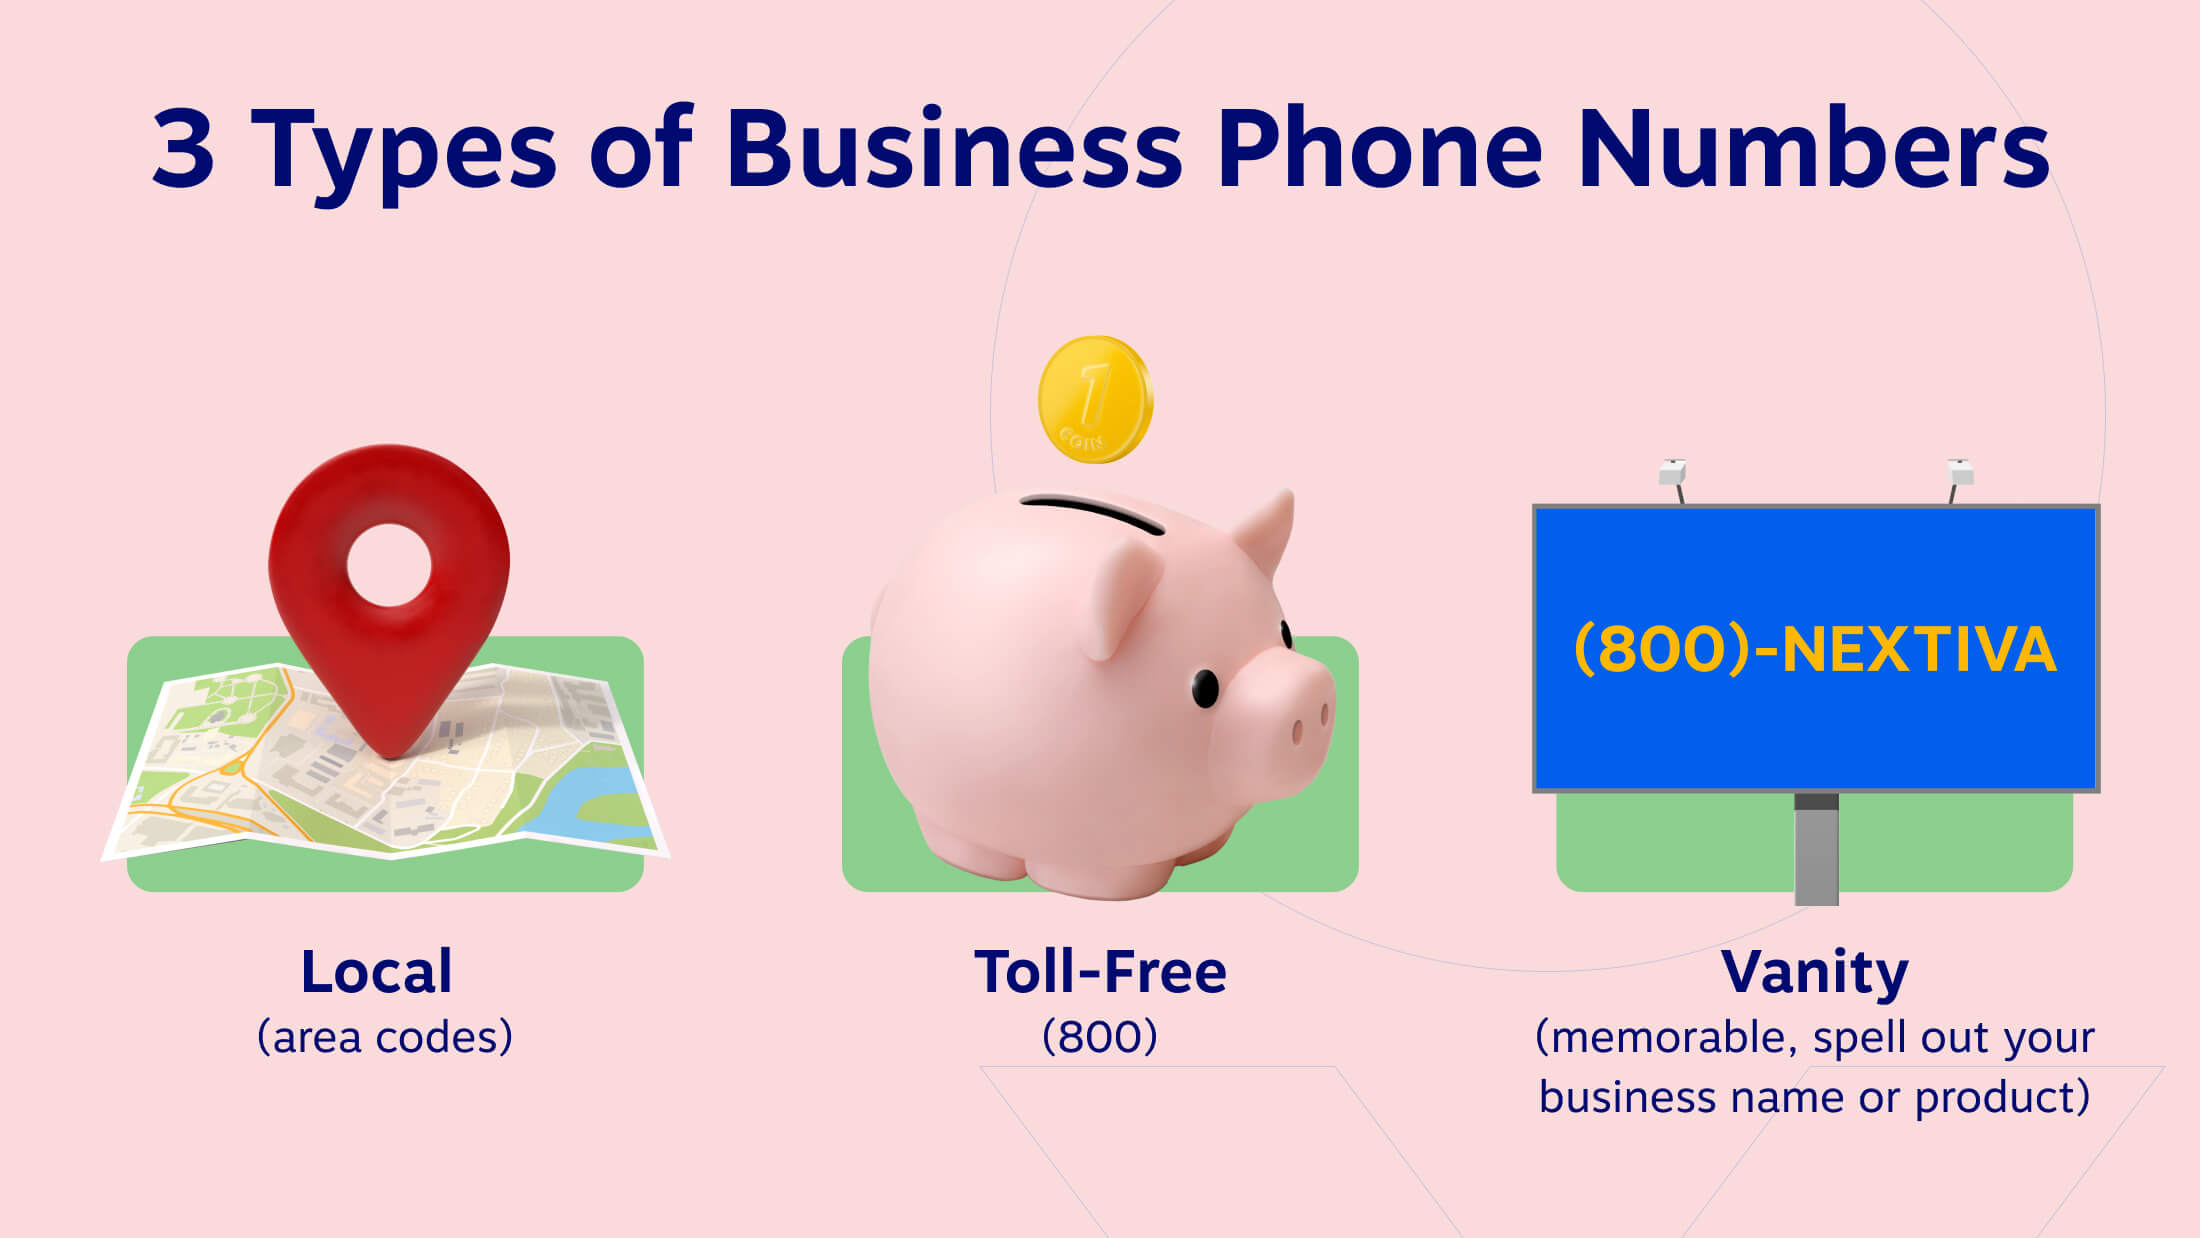 Types of business phone numbers